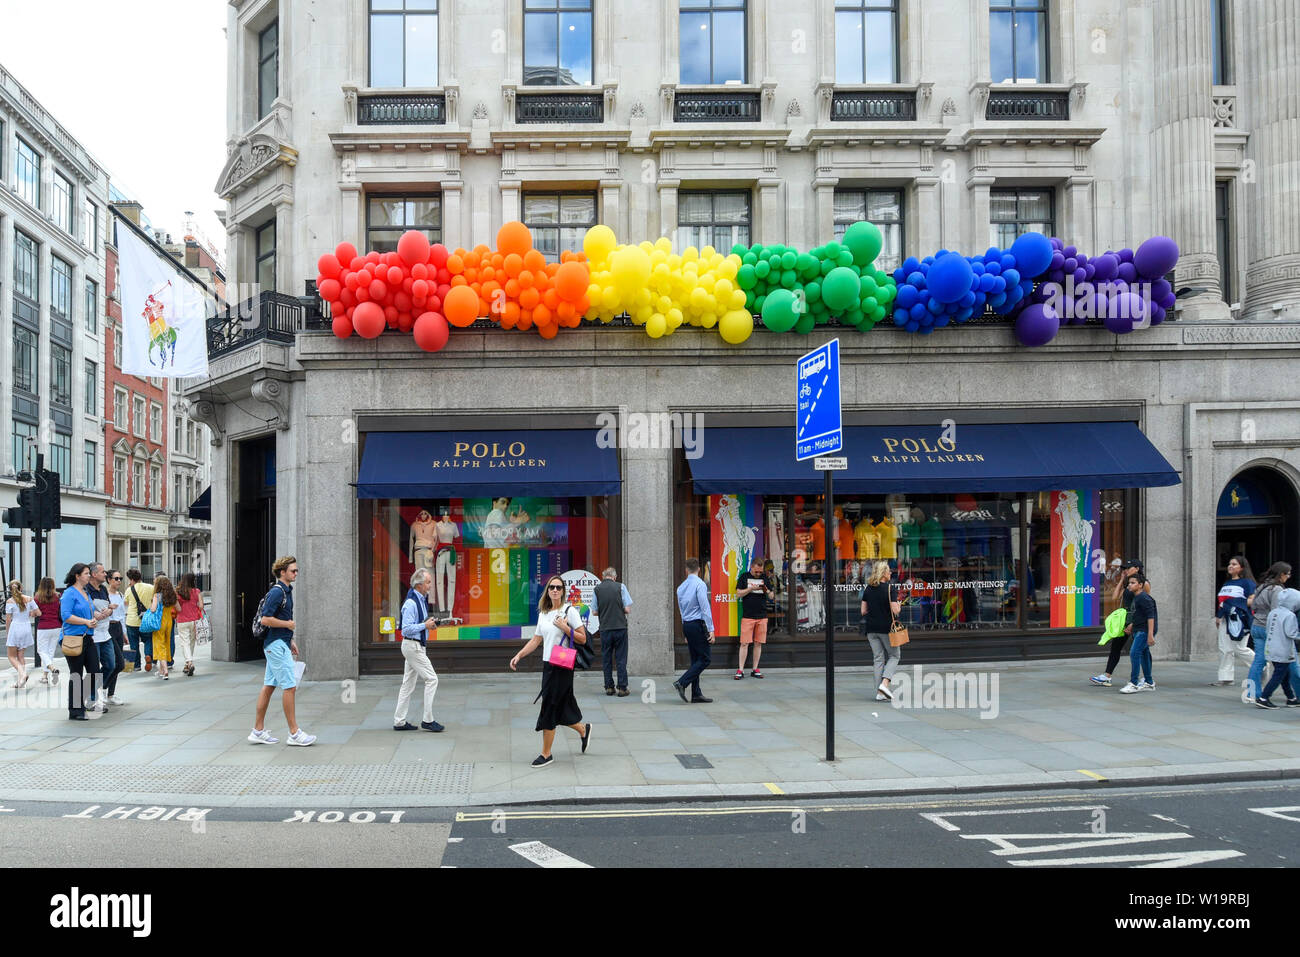 London, UK. 1 July 2019. The Polo Ralph Lauren store in Regent Street is  one of many stores in the capital's West End whose exteriors are decorated  in rainbow colours in support